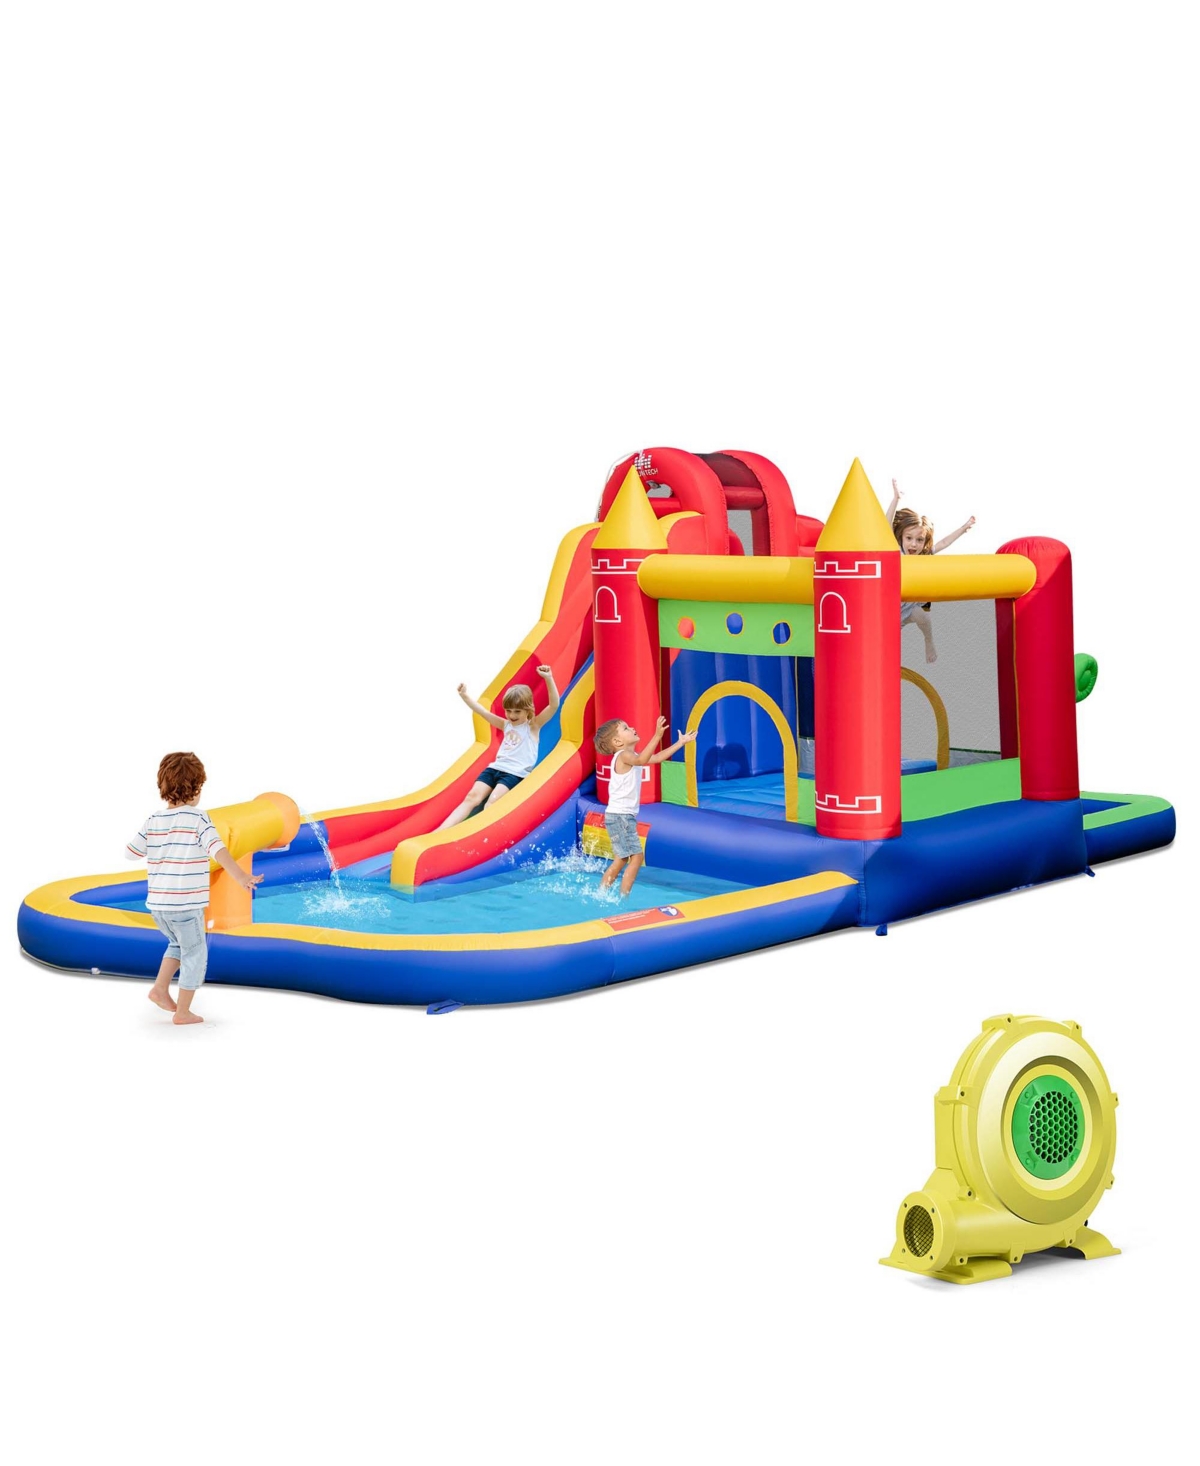 9-in-1 Inflatable Bounce Castle with Waterslide Water Cannon for 3+ with 735W Blower - Red